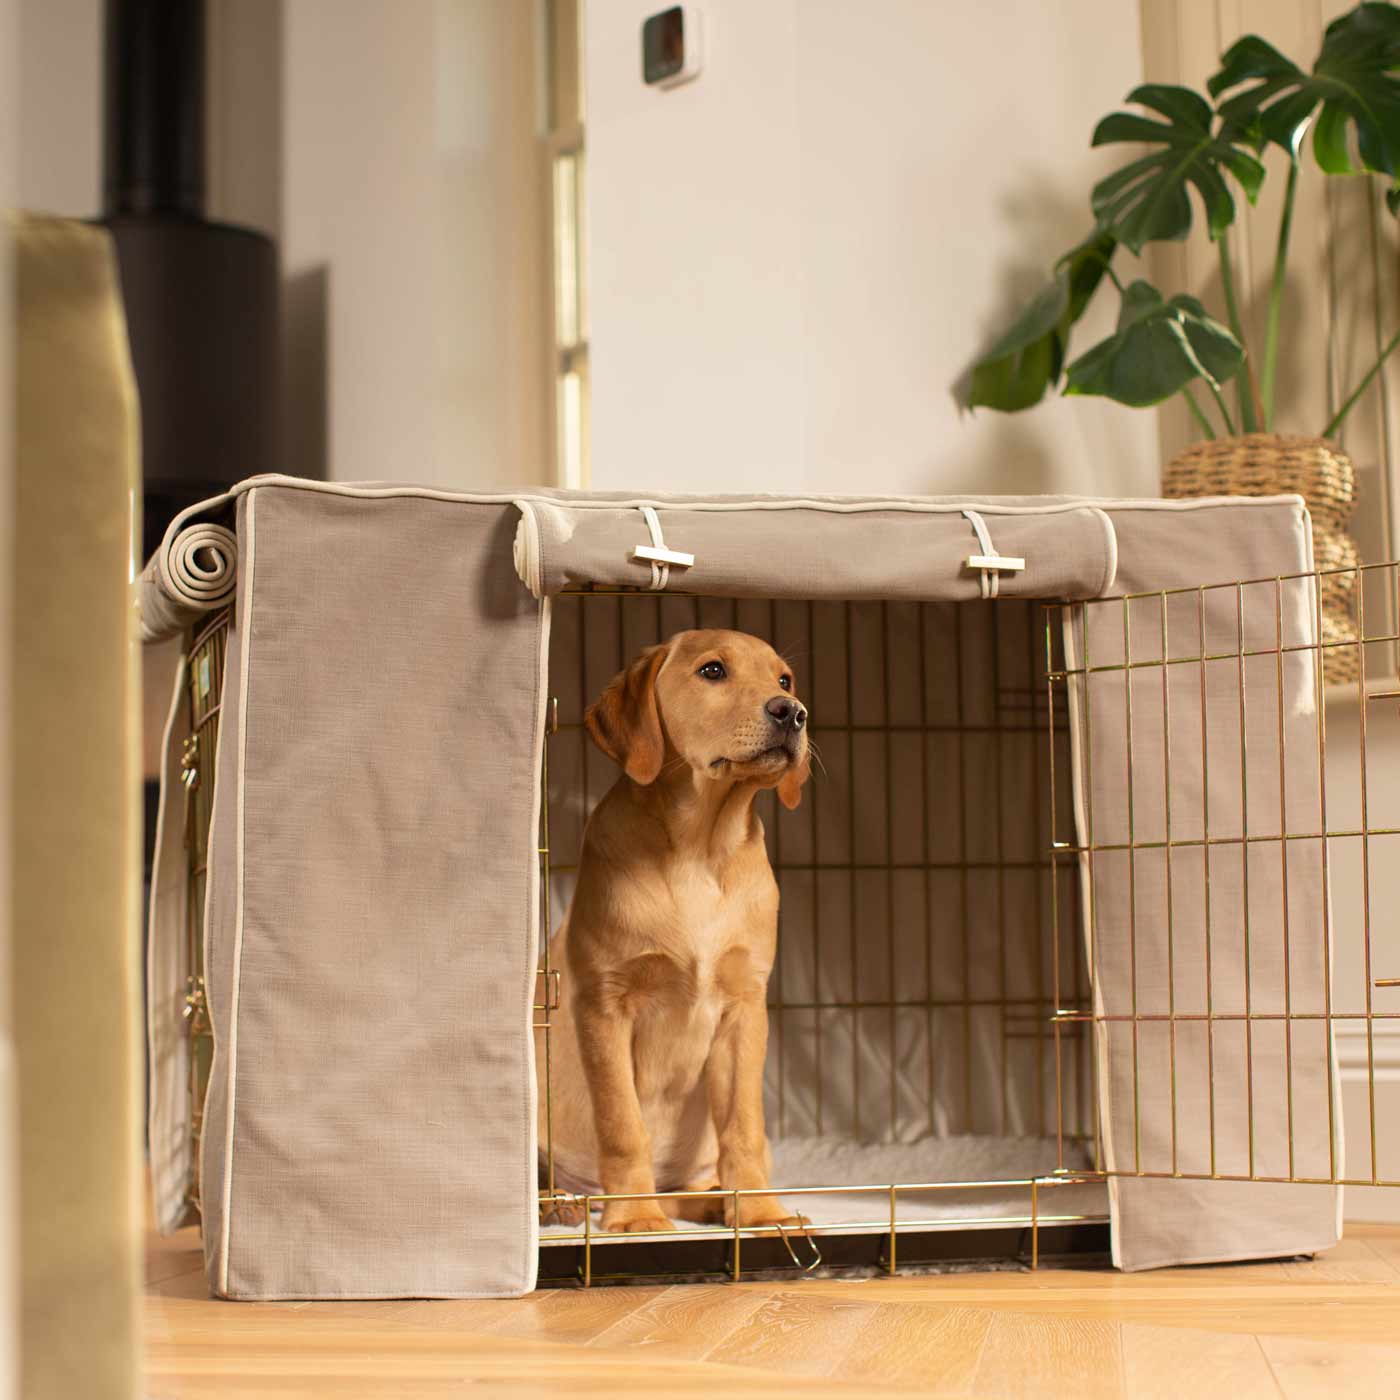 Discover Our Heavy-Duty Dog Crate With Savanna Stone Crate Cover! The Perfect Crate Accessory To Build The Ultimate Pet Den! Available To Personalise Here at Lords & Labradors    